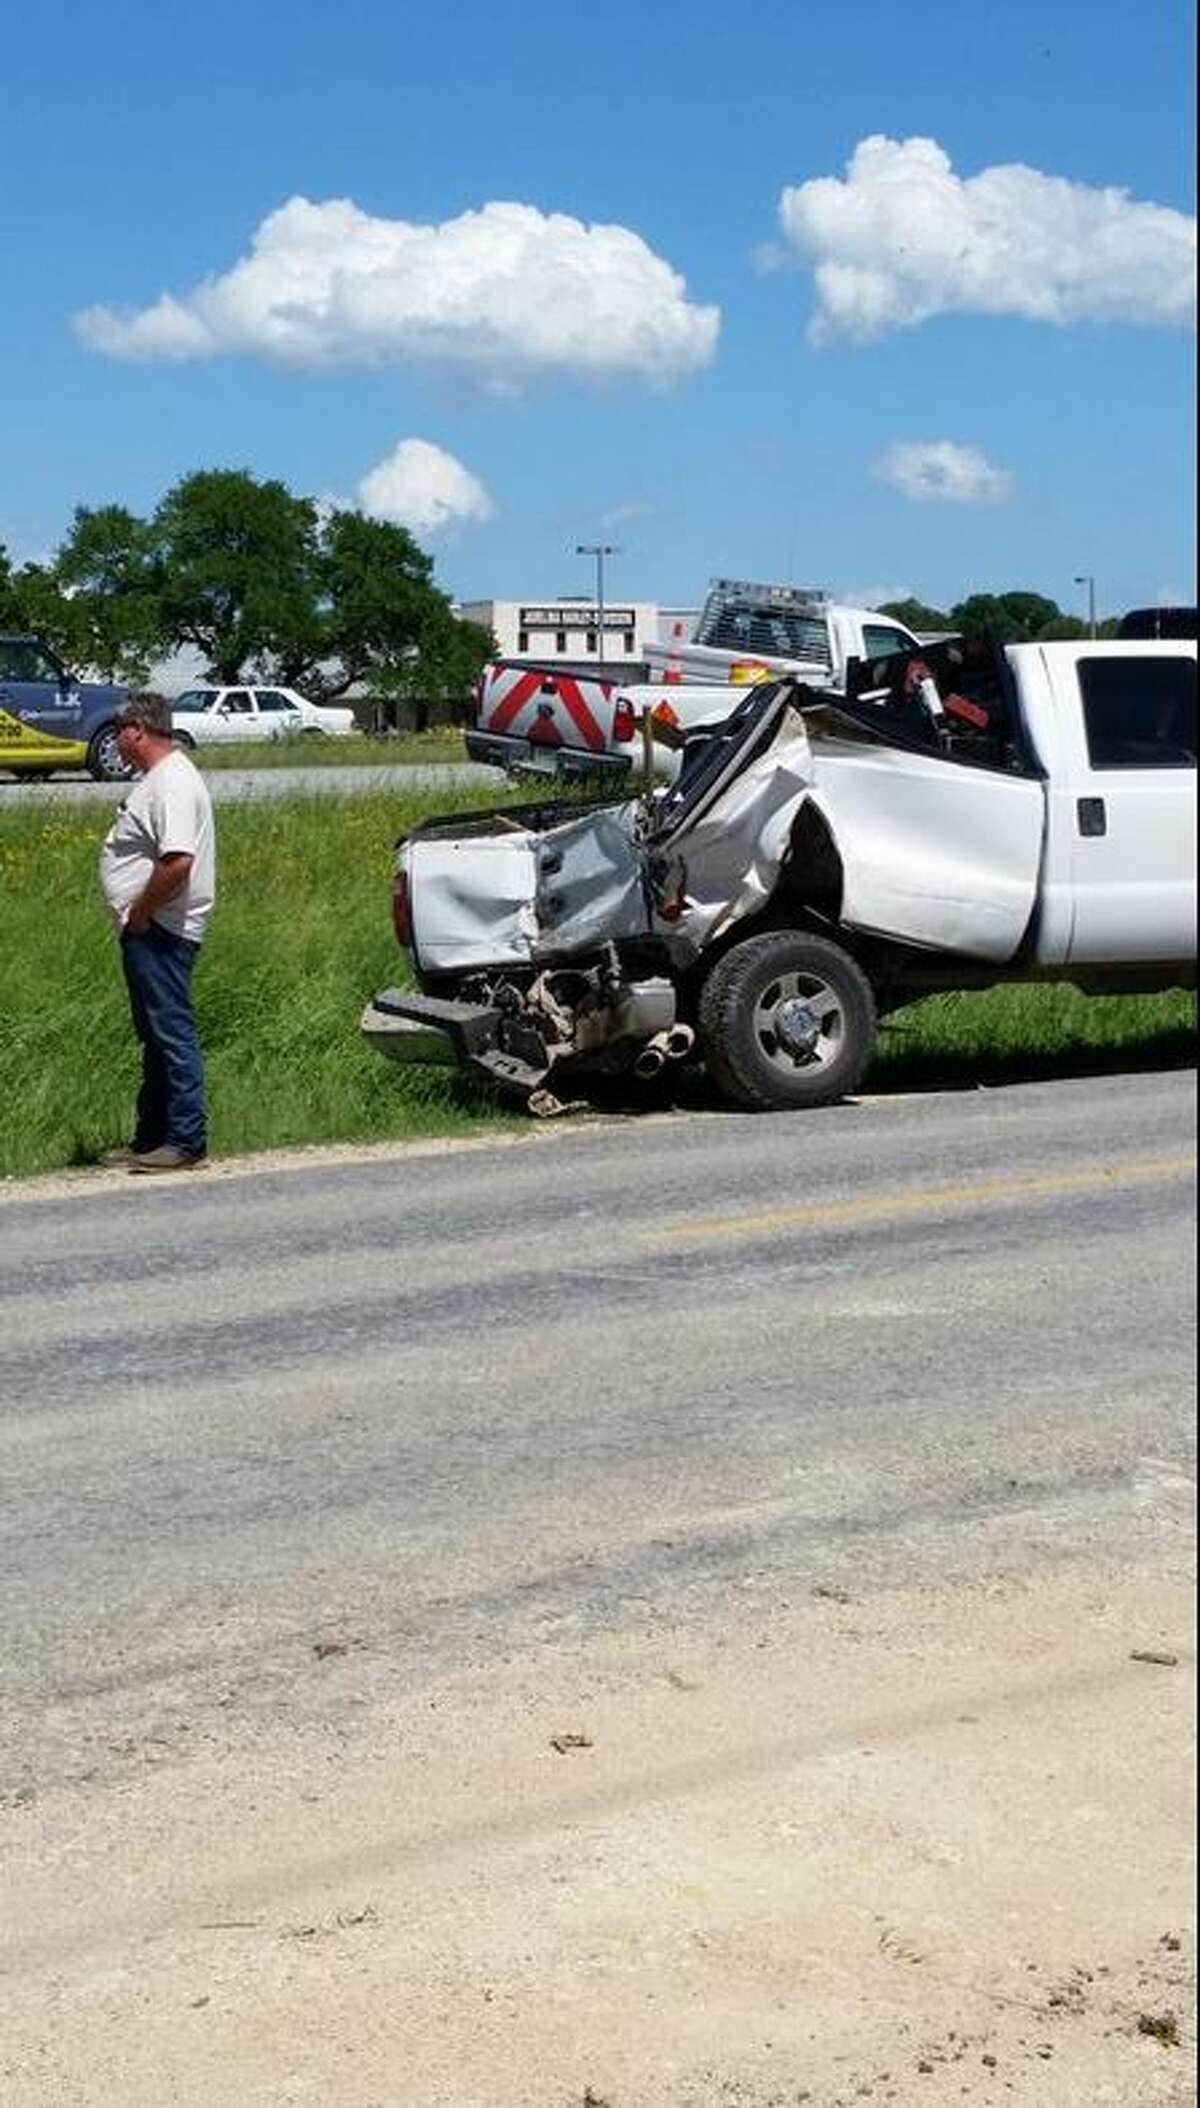 Photos from the crash that occurred Monday afternoon near Interstate 10 and Fair Oaks.